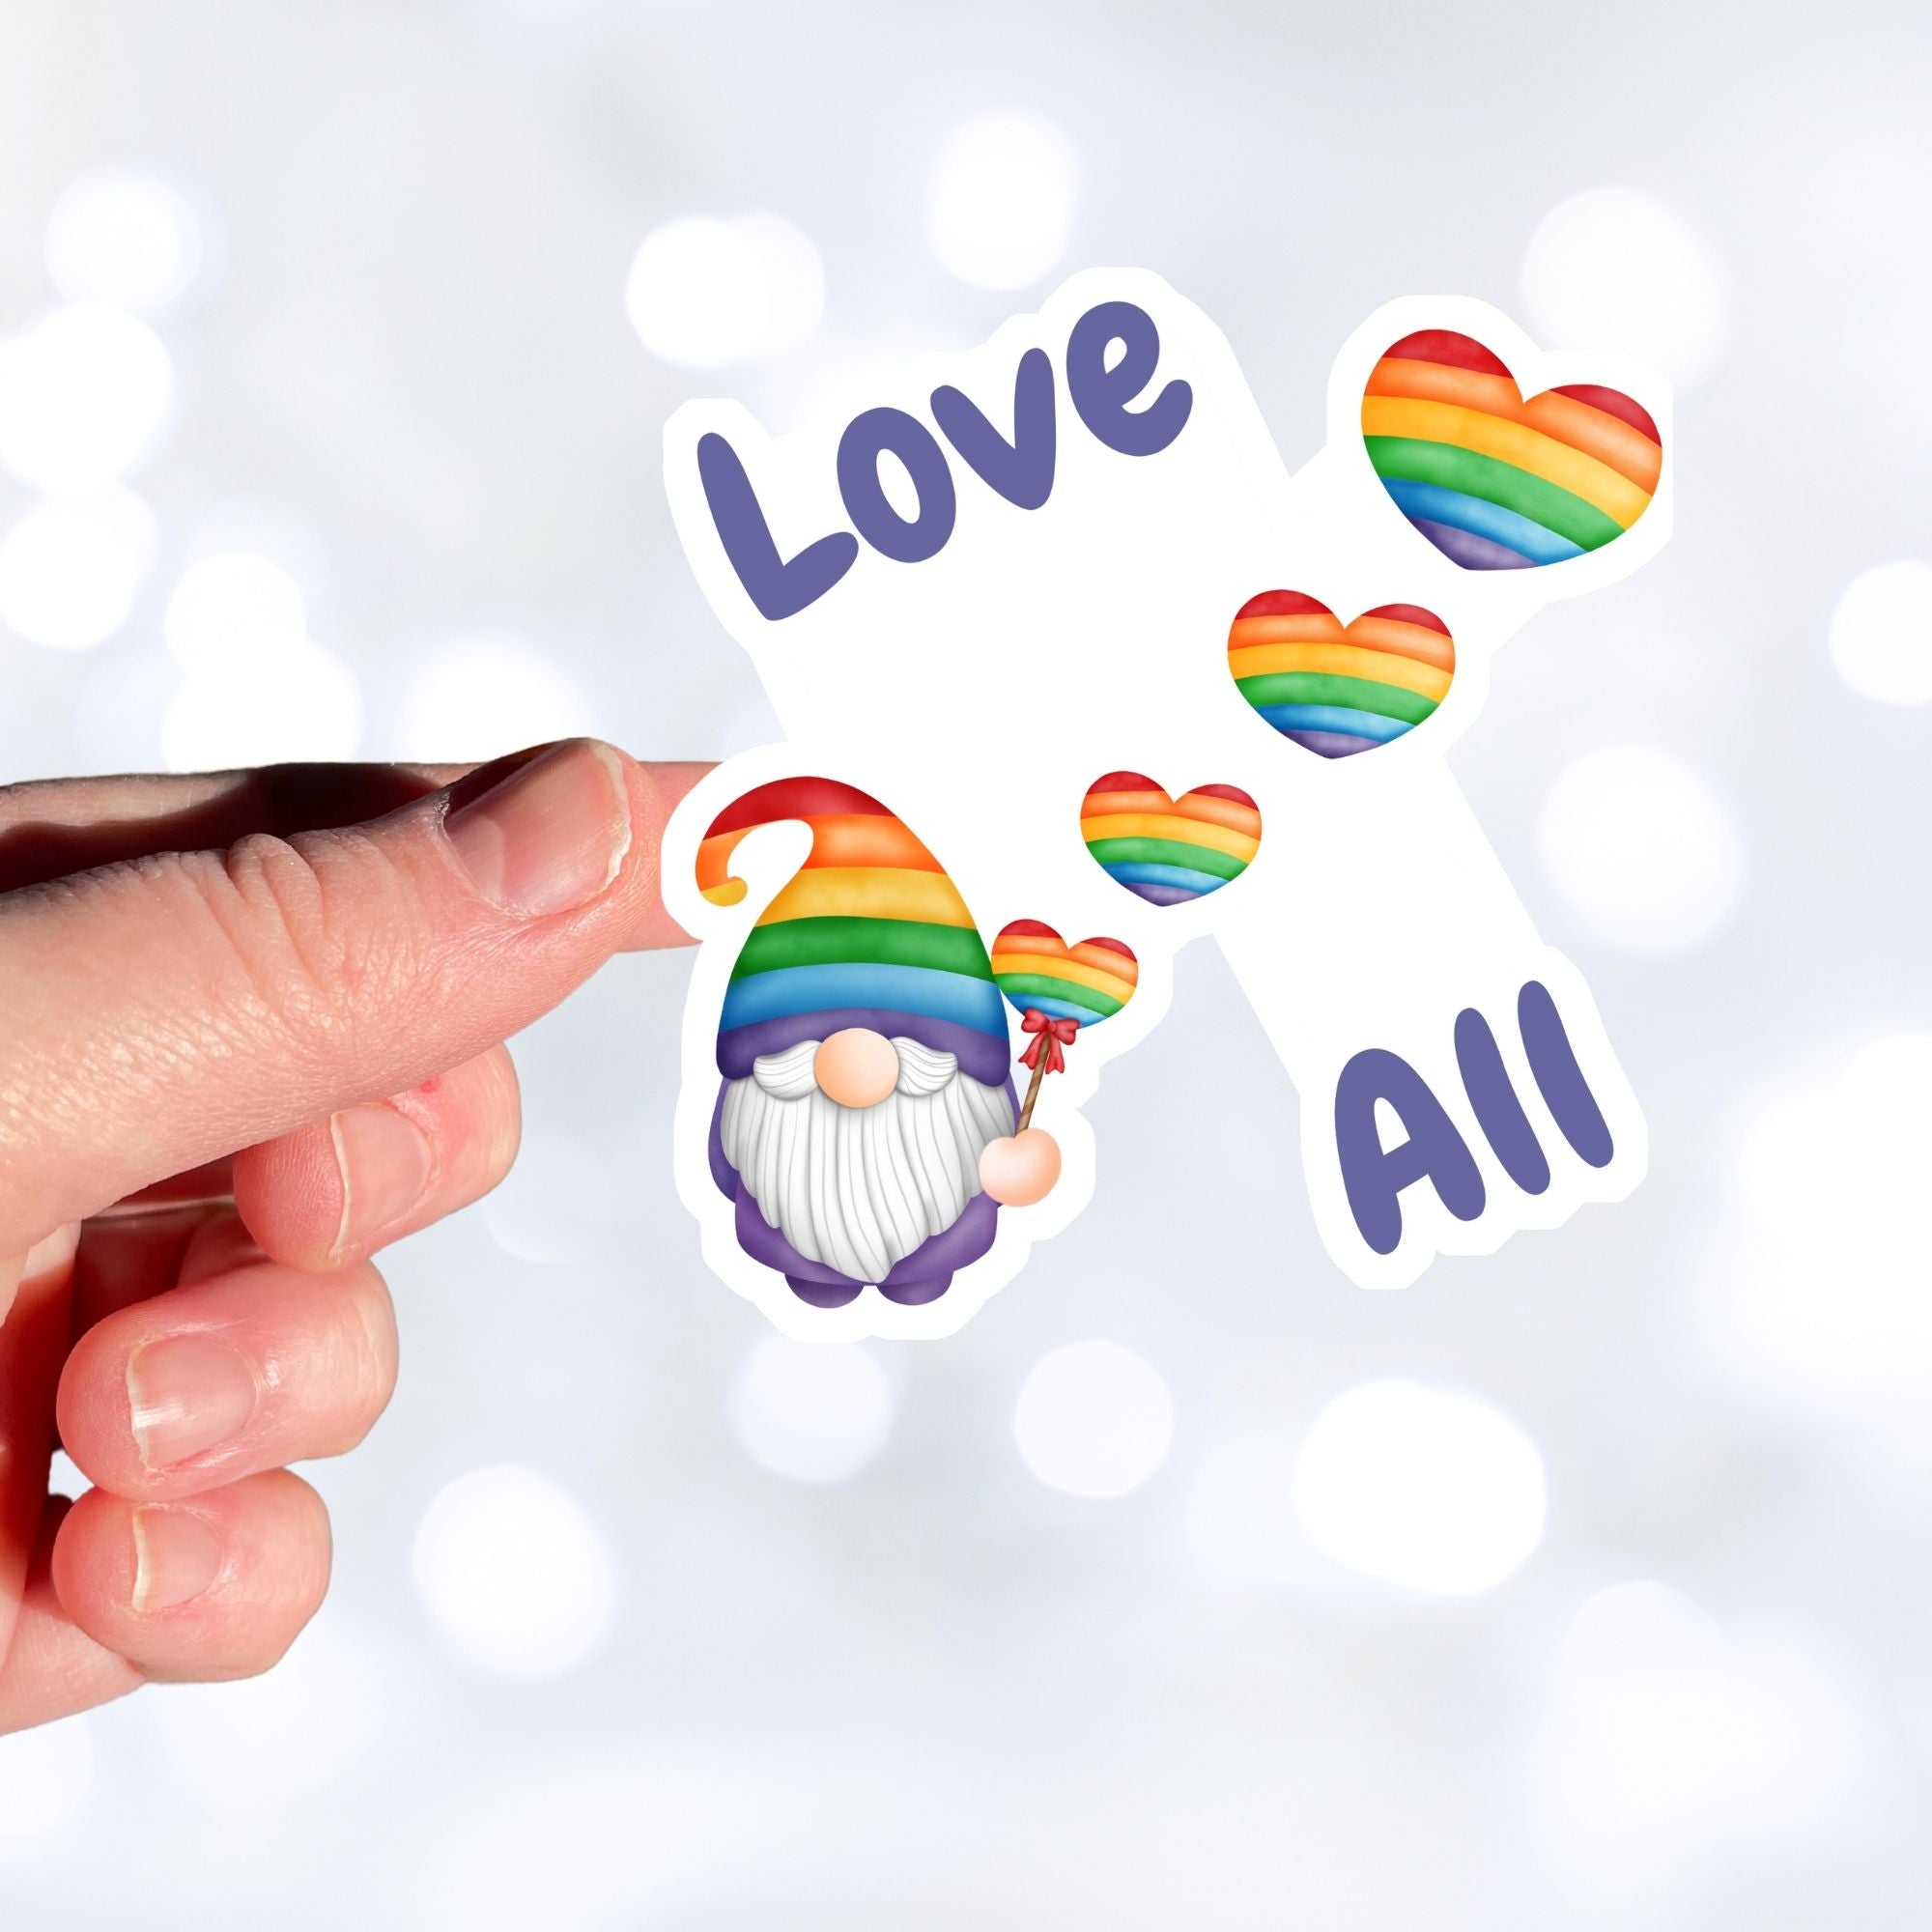 This gnome is showing his Pride! With the words "Love All", this individual die-cut sticker features a gnome with a rainbow hat and rainbow heart balloons. This image shows a hand holding the Gnome Love All sticker.